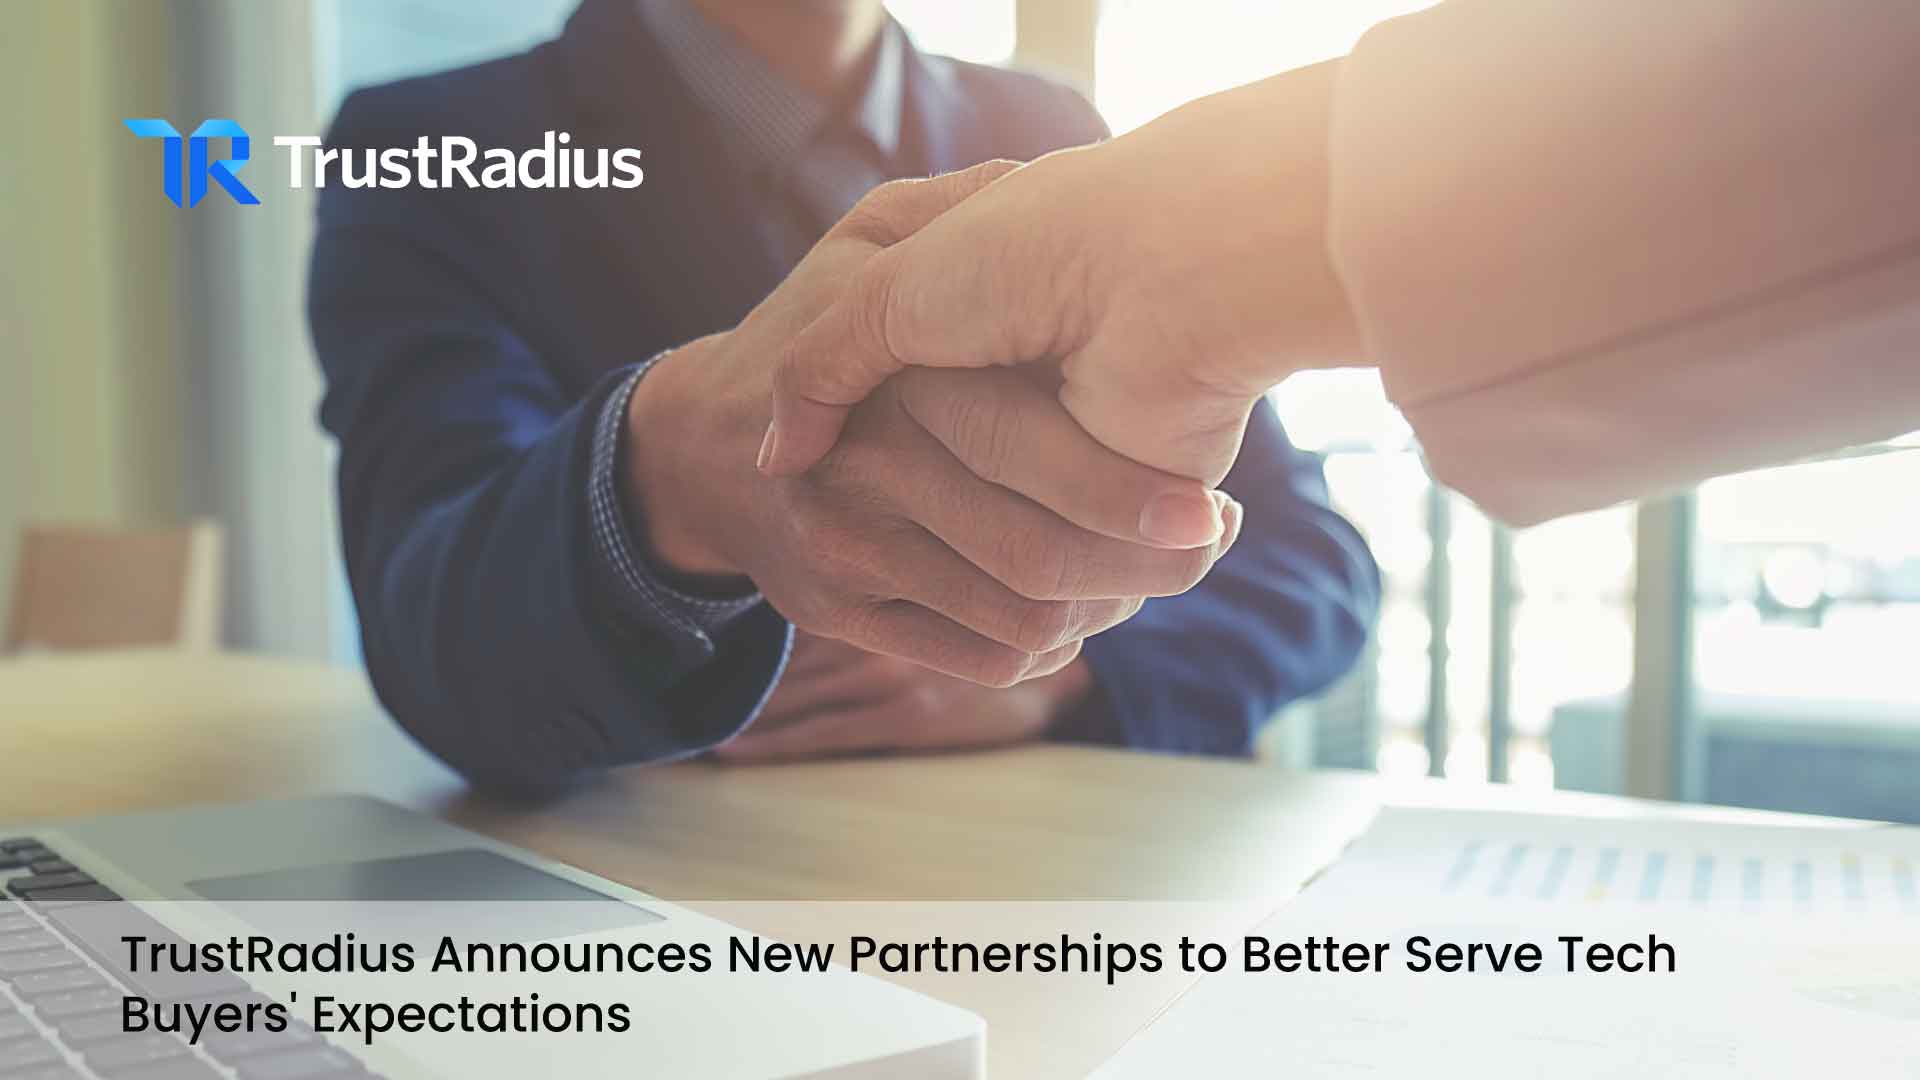 TrustRadius Announces New Partnerships to Better Serve Tech Buyers' Expectations